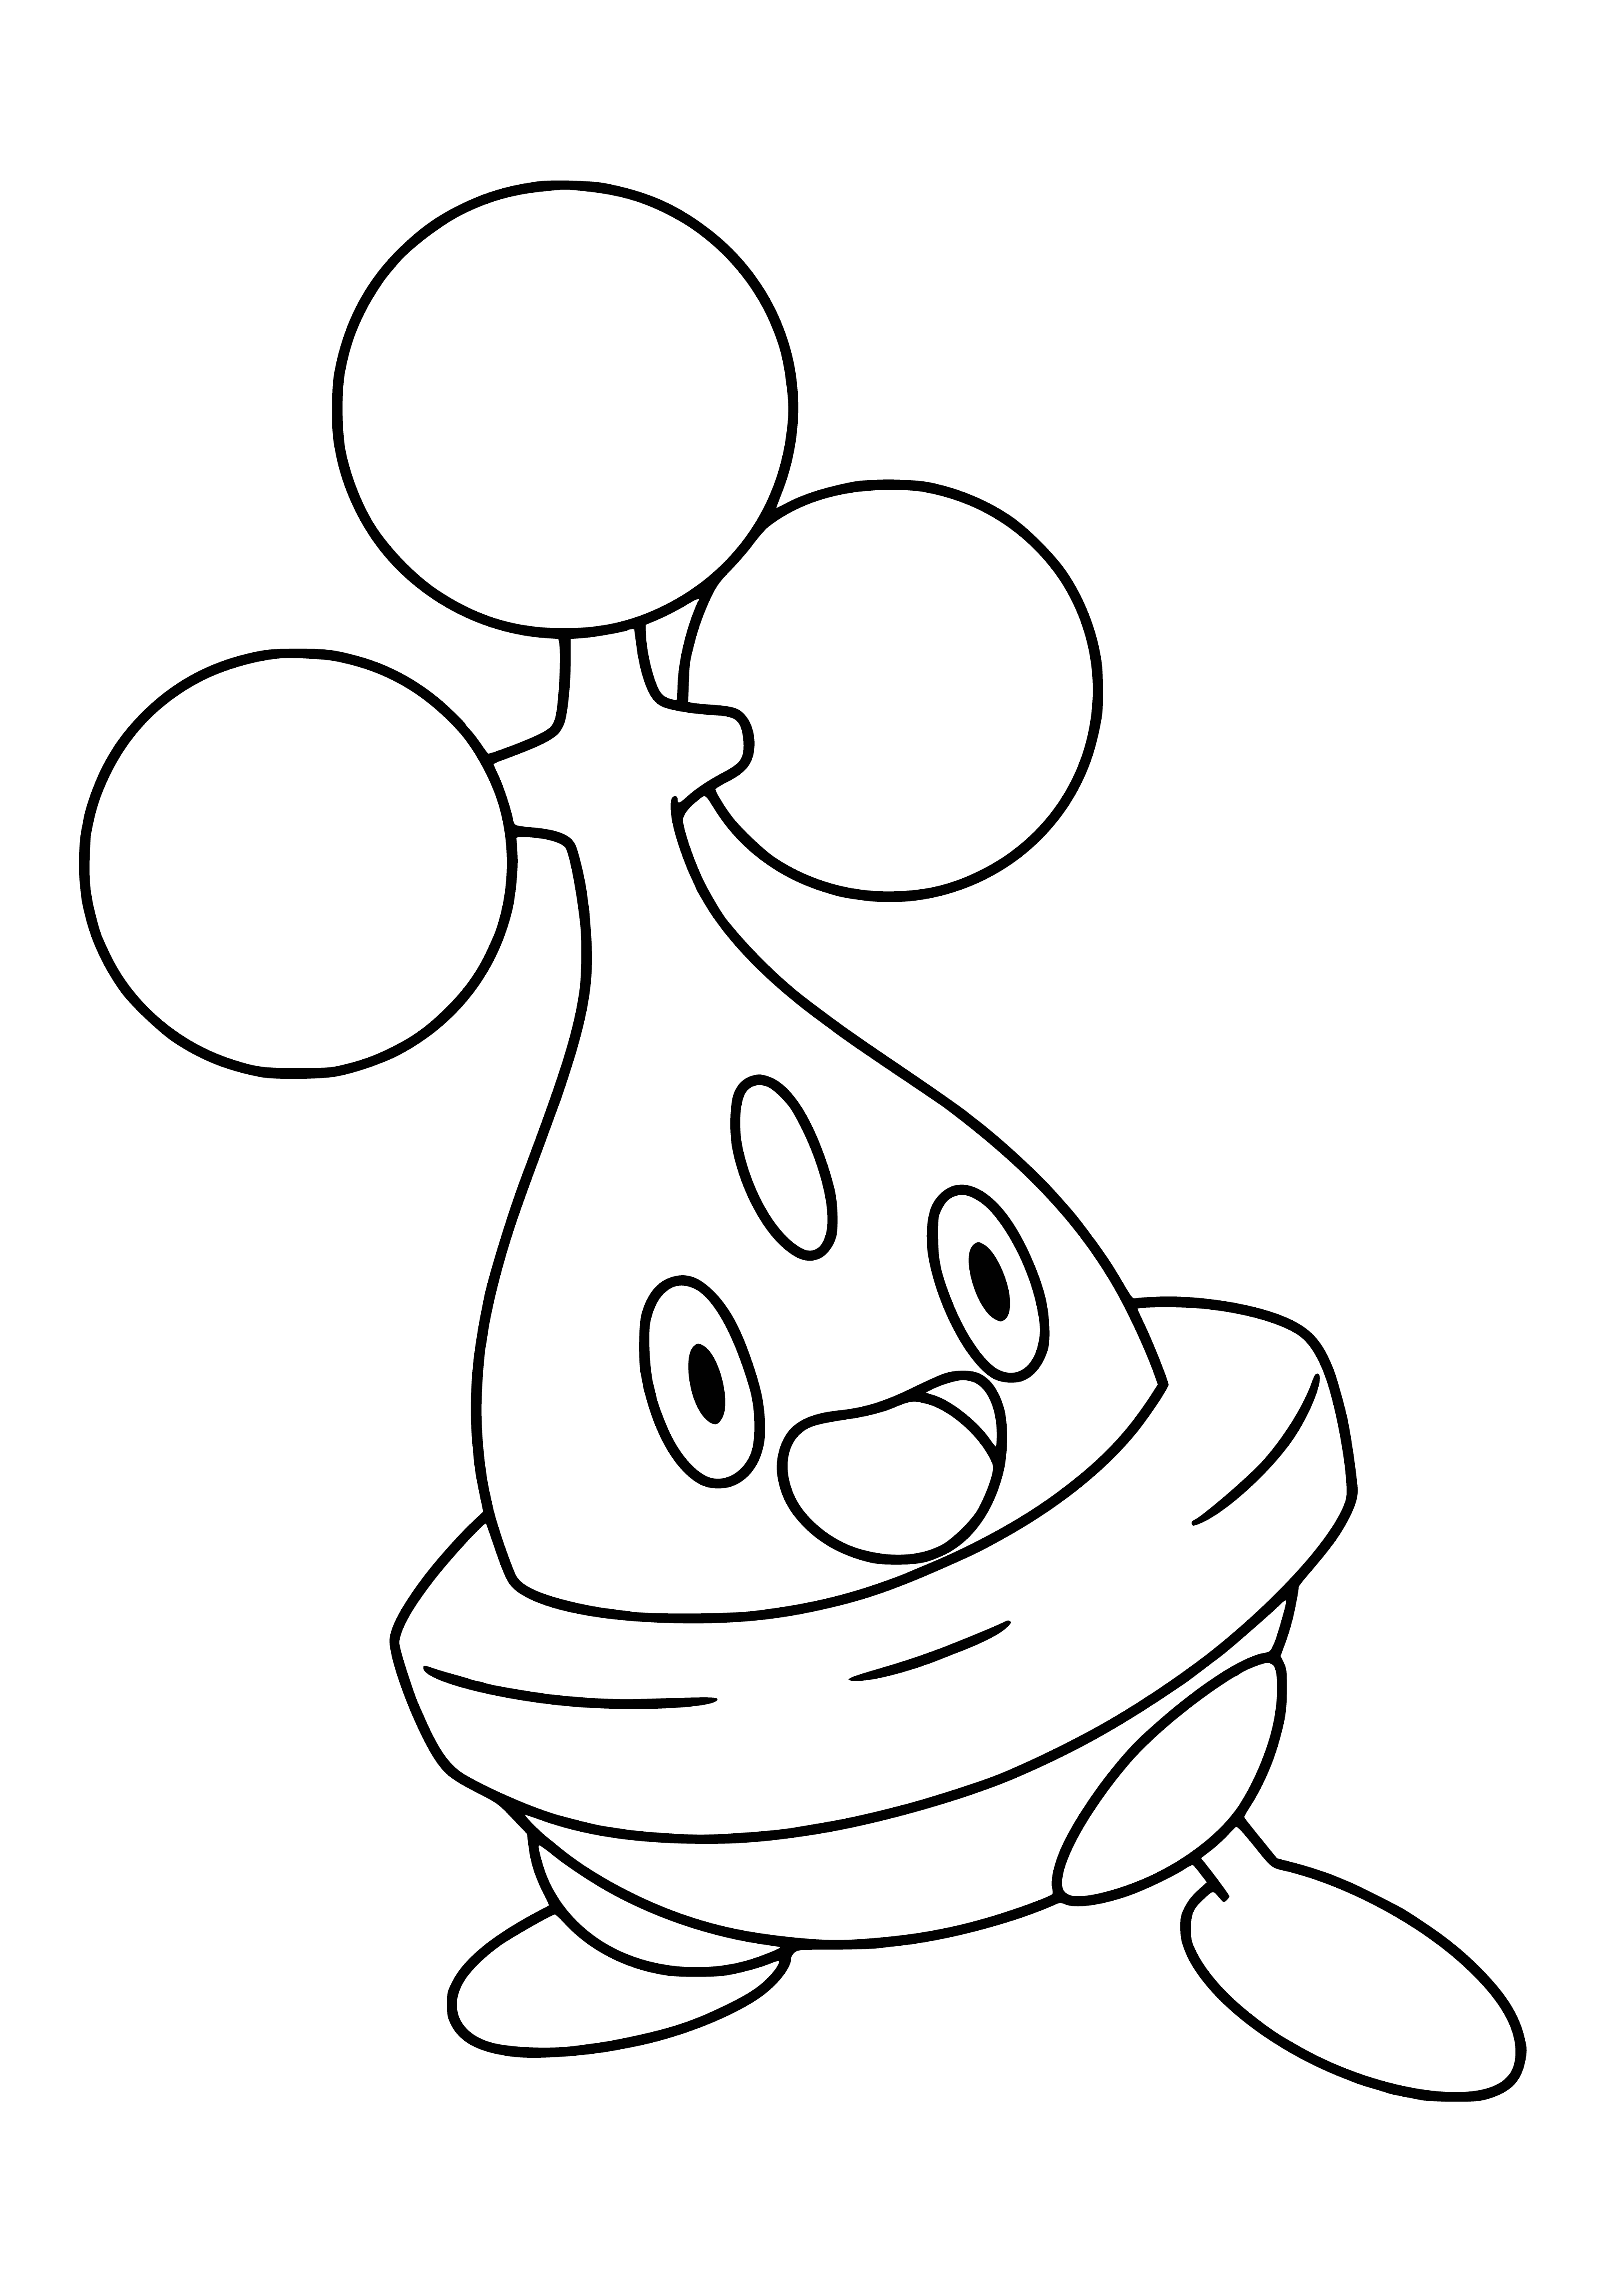 coloring page: Small, brown Pokémon resembling a bonsai tree; round eyes, rock-hard body; evolves into Sudowoodo.